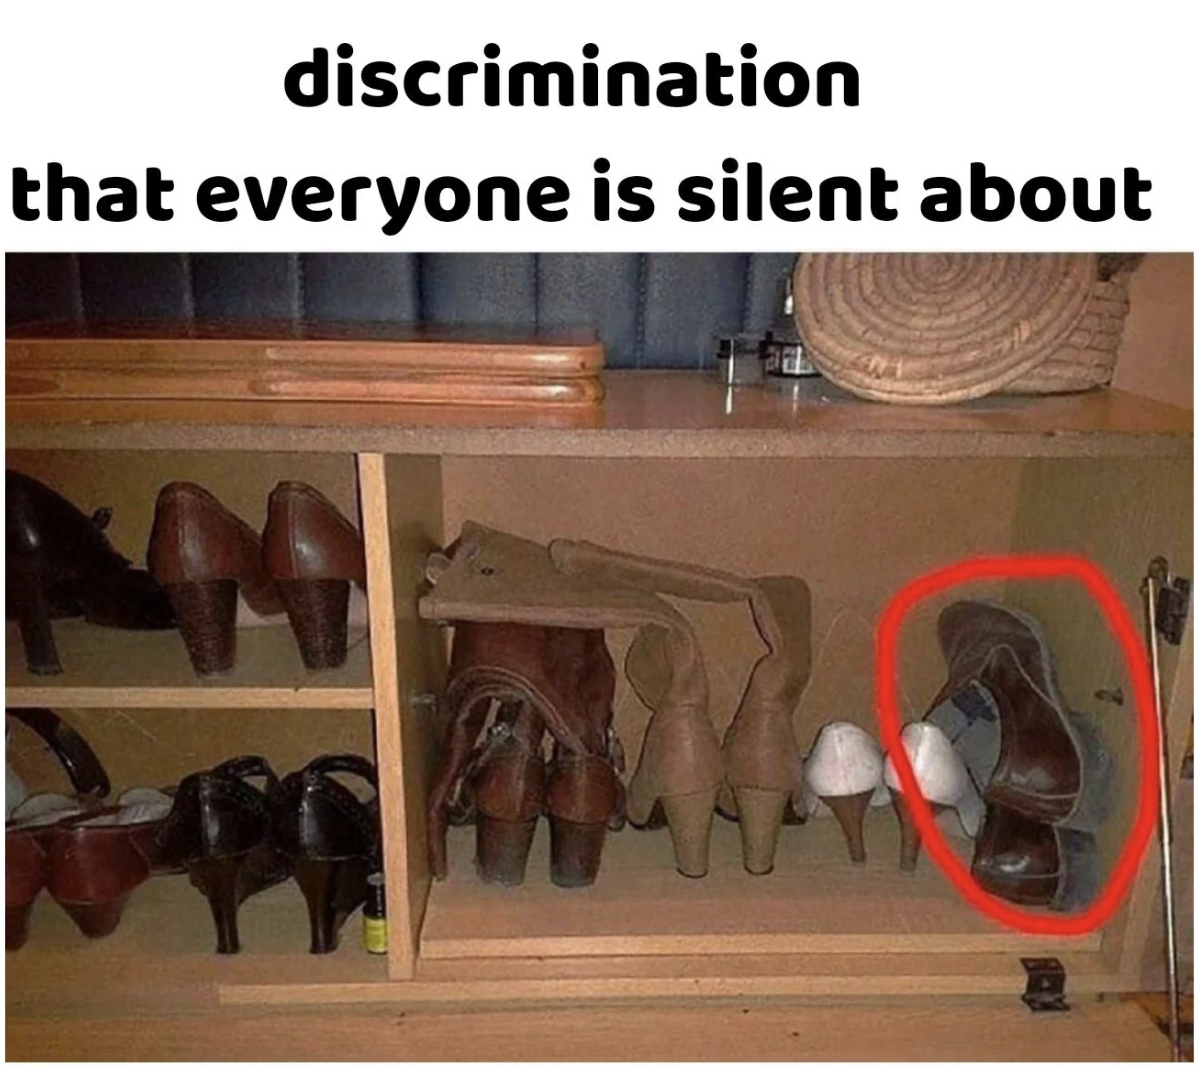 plywood - discrimination that everyone is silent about